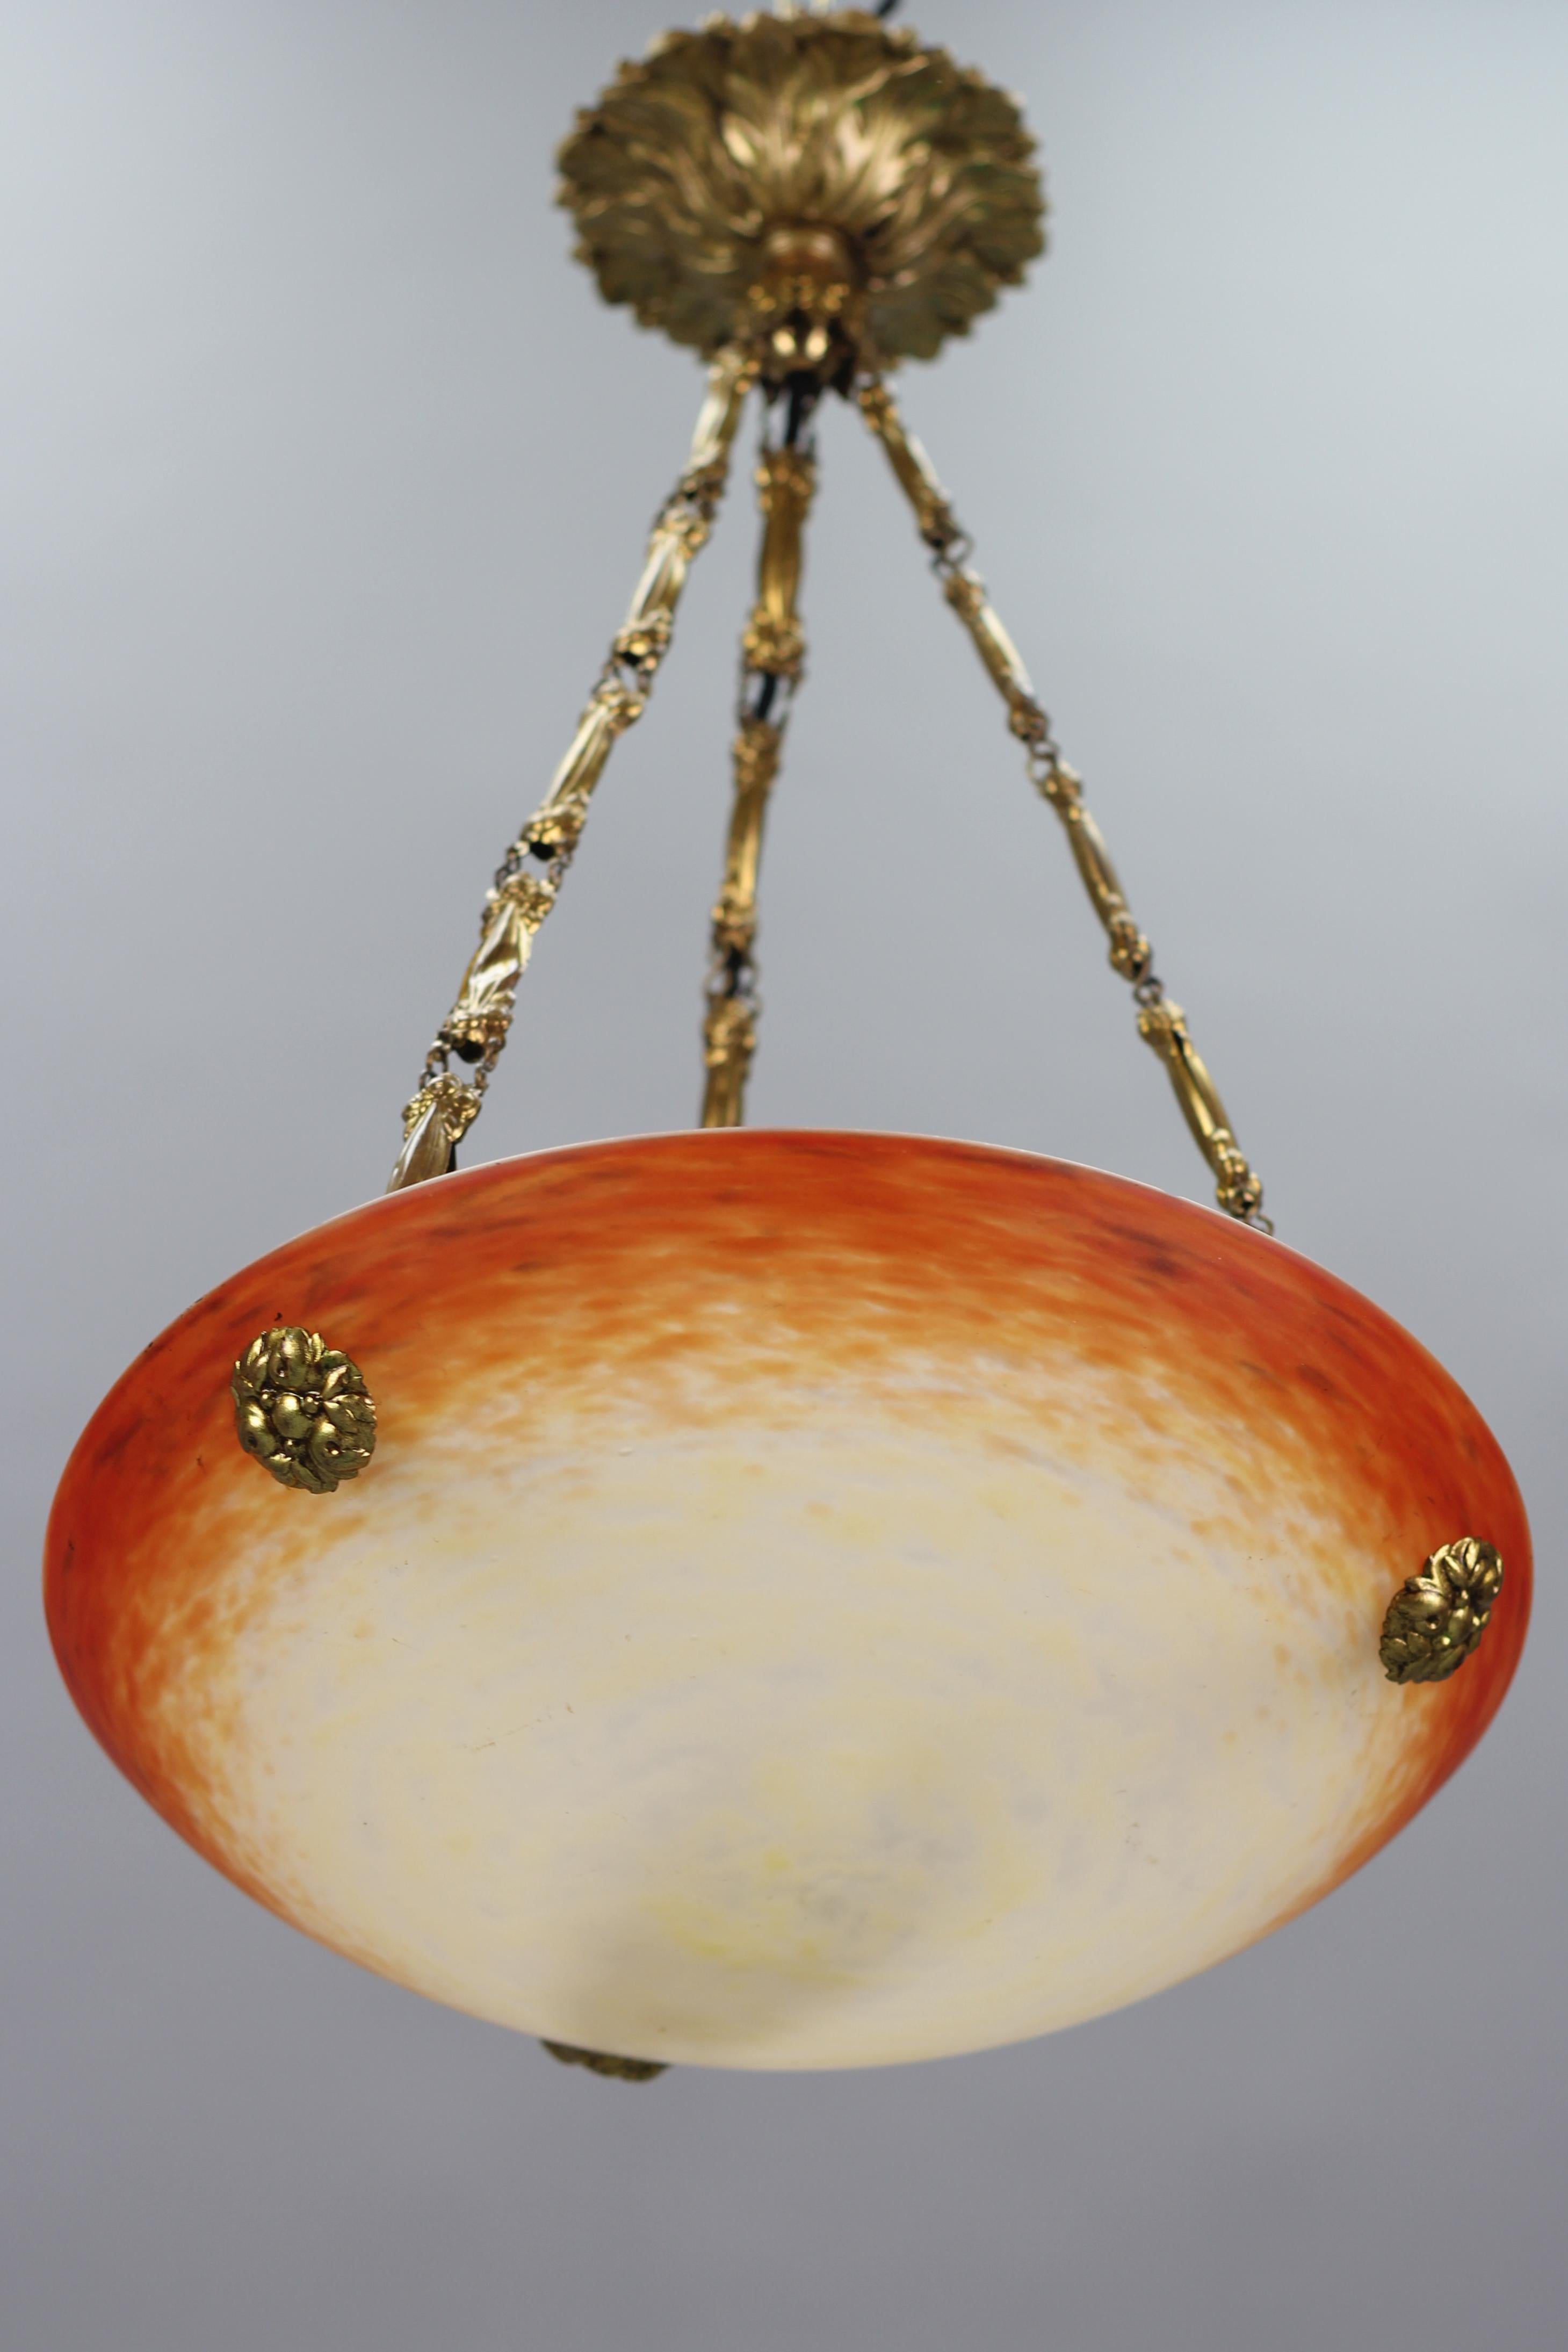 This adorable French Art Nouveau period pendant chandelier features a mottled “Pâte de Verre” art glass shade in orange, yellow, and cream color, signed ”Schneider” by Charles Schneider, hung at an ornate brass and bronze fixture with one socket for